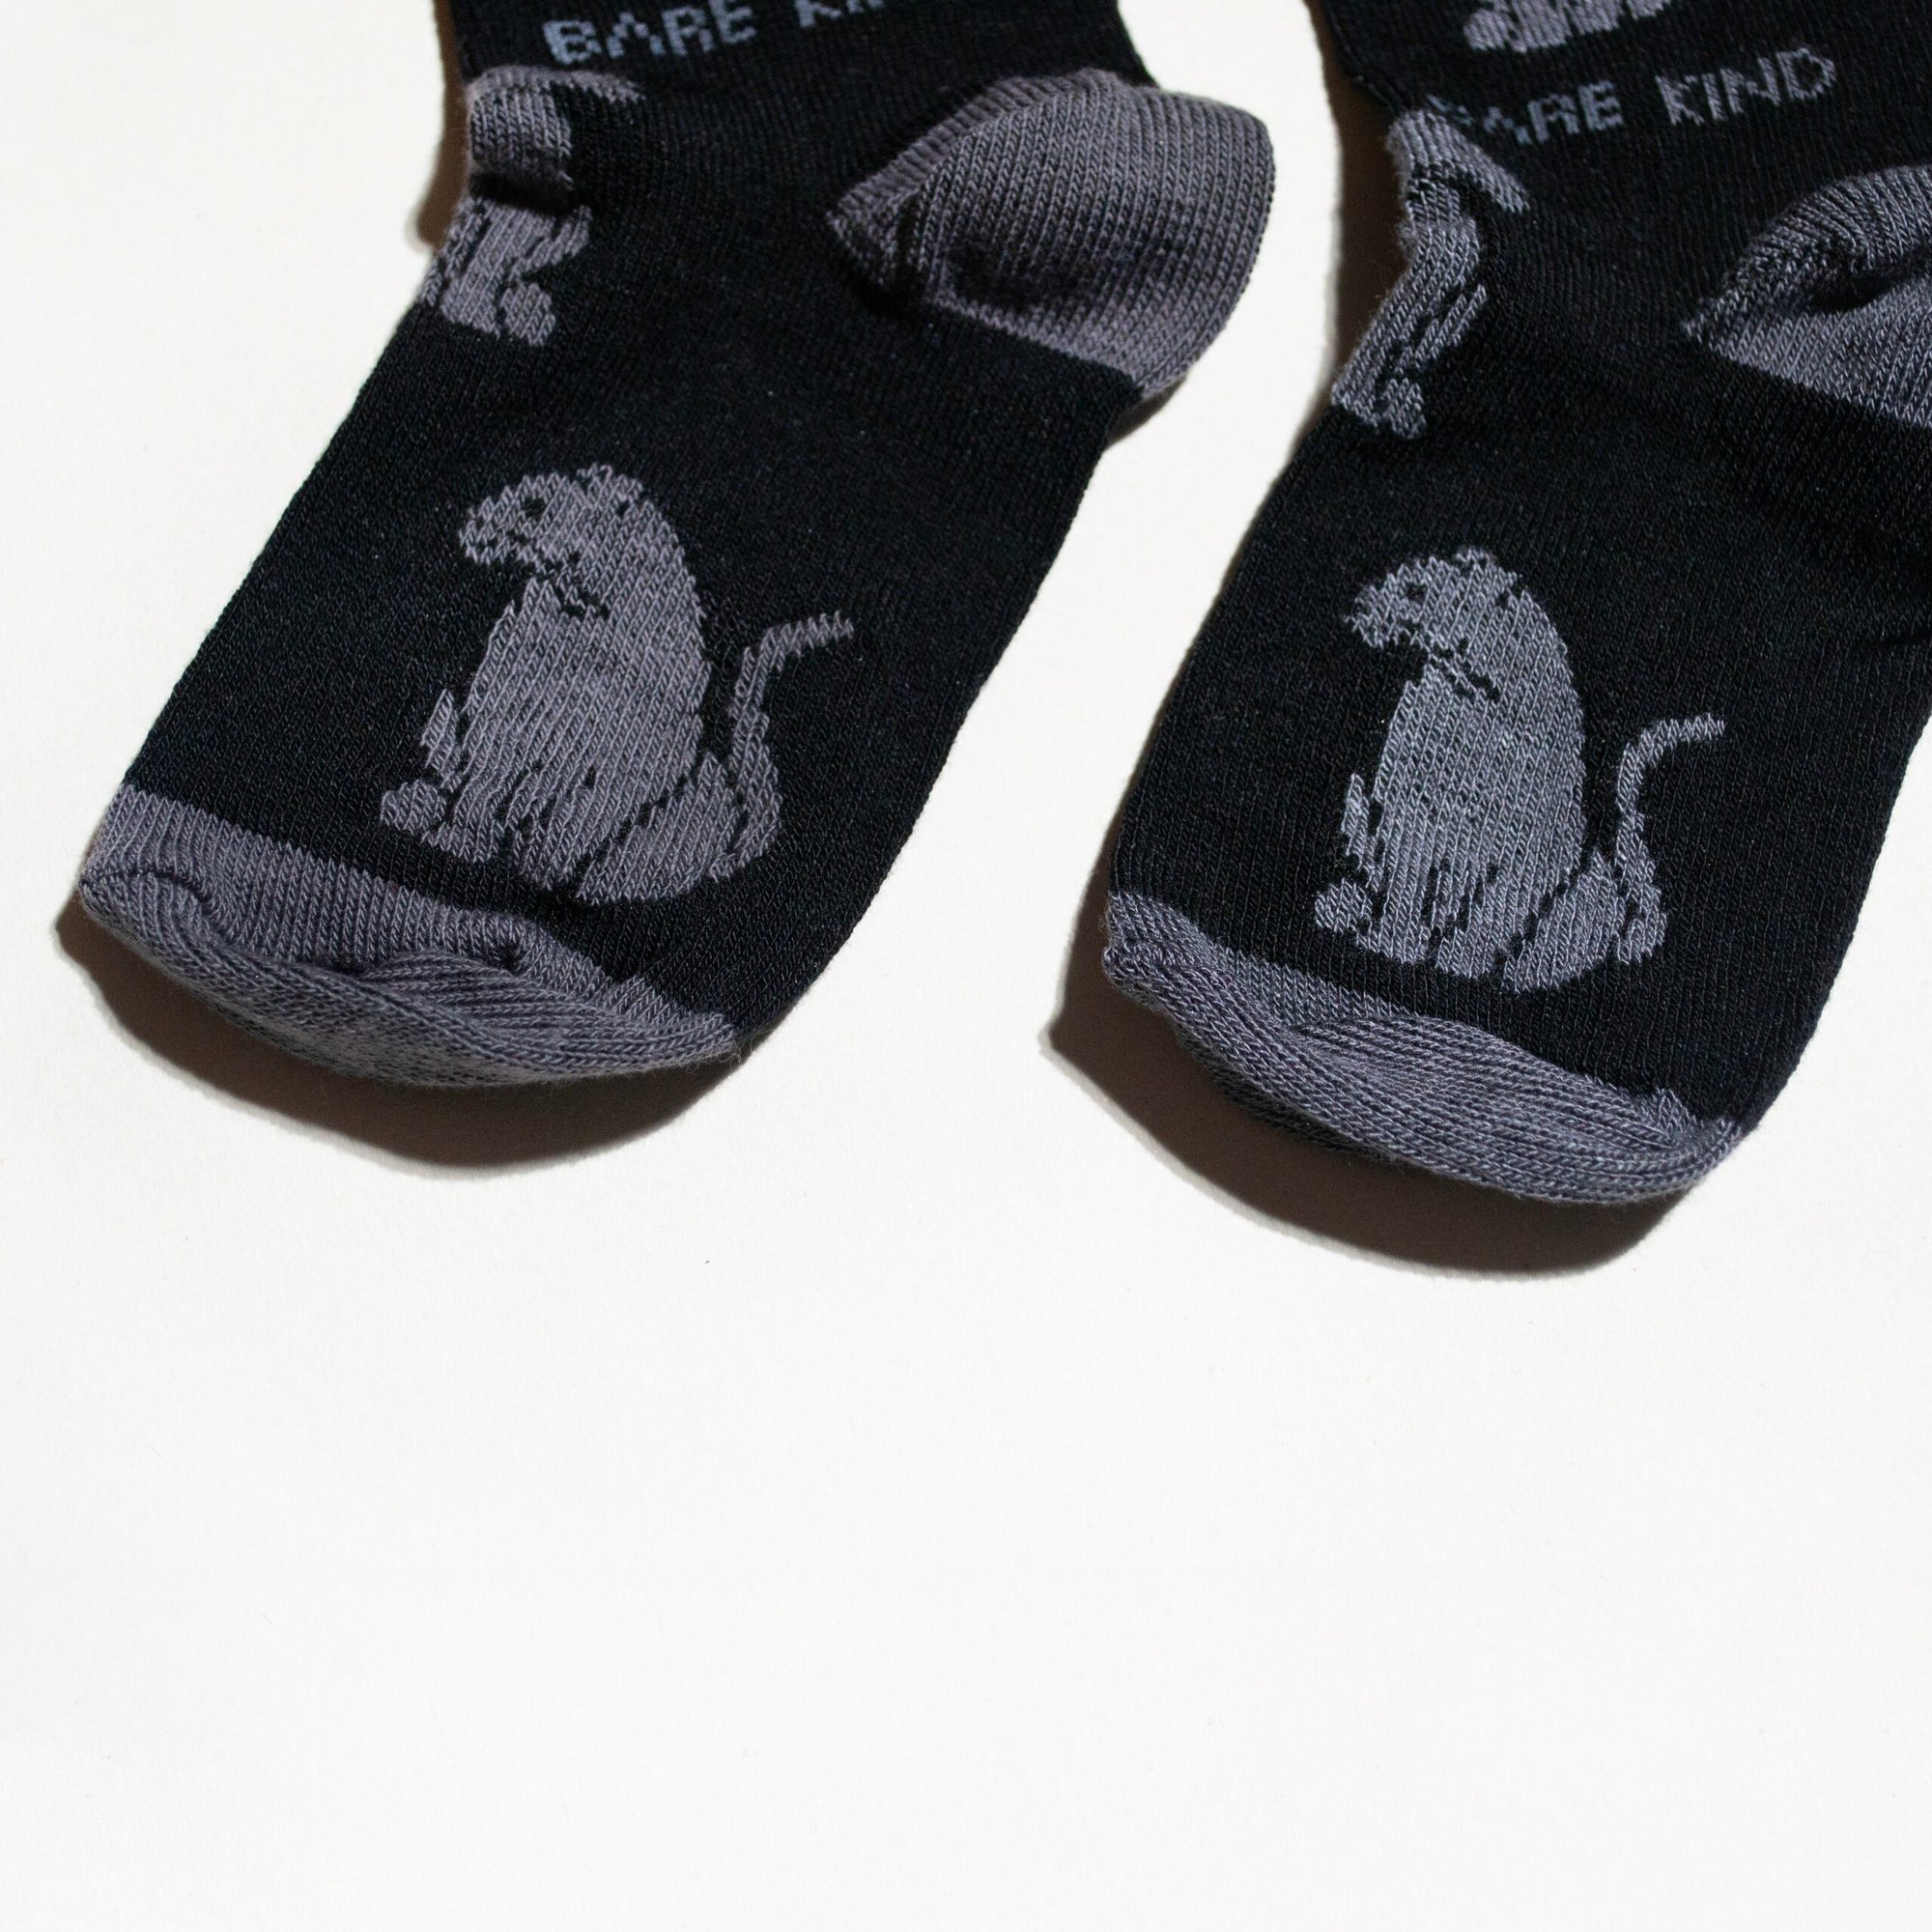 Save The Black Panthers Bamboo Socks For Kids